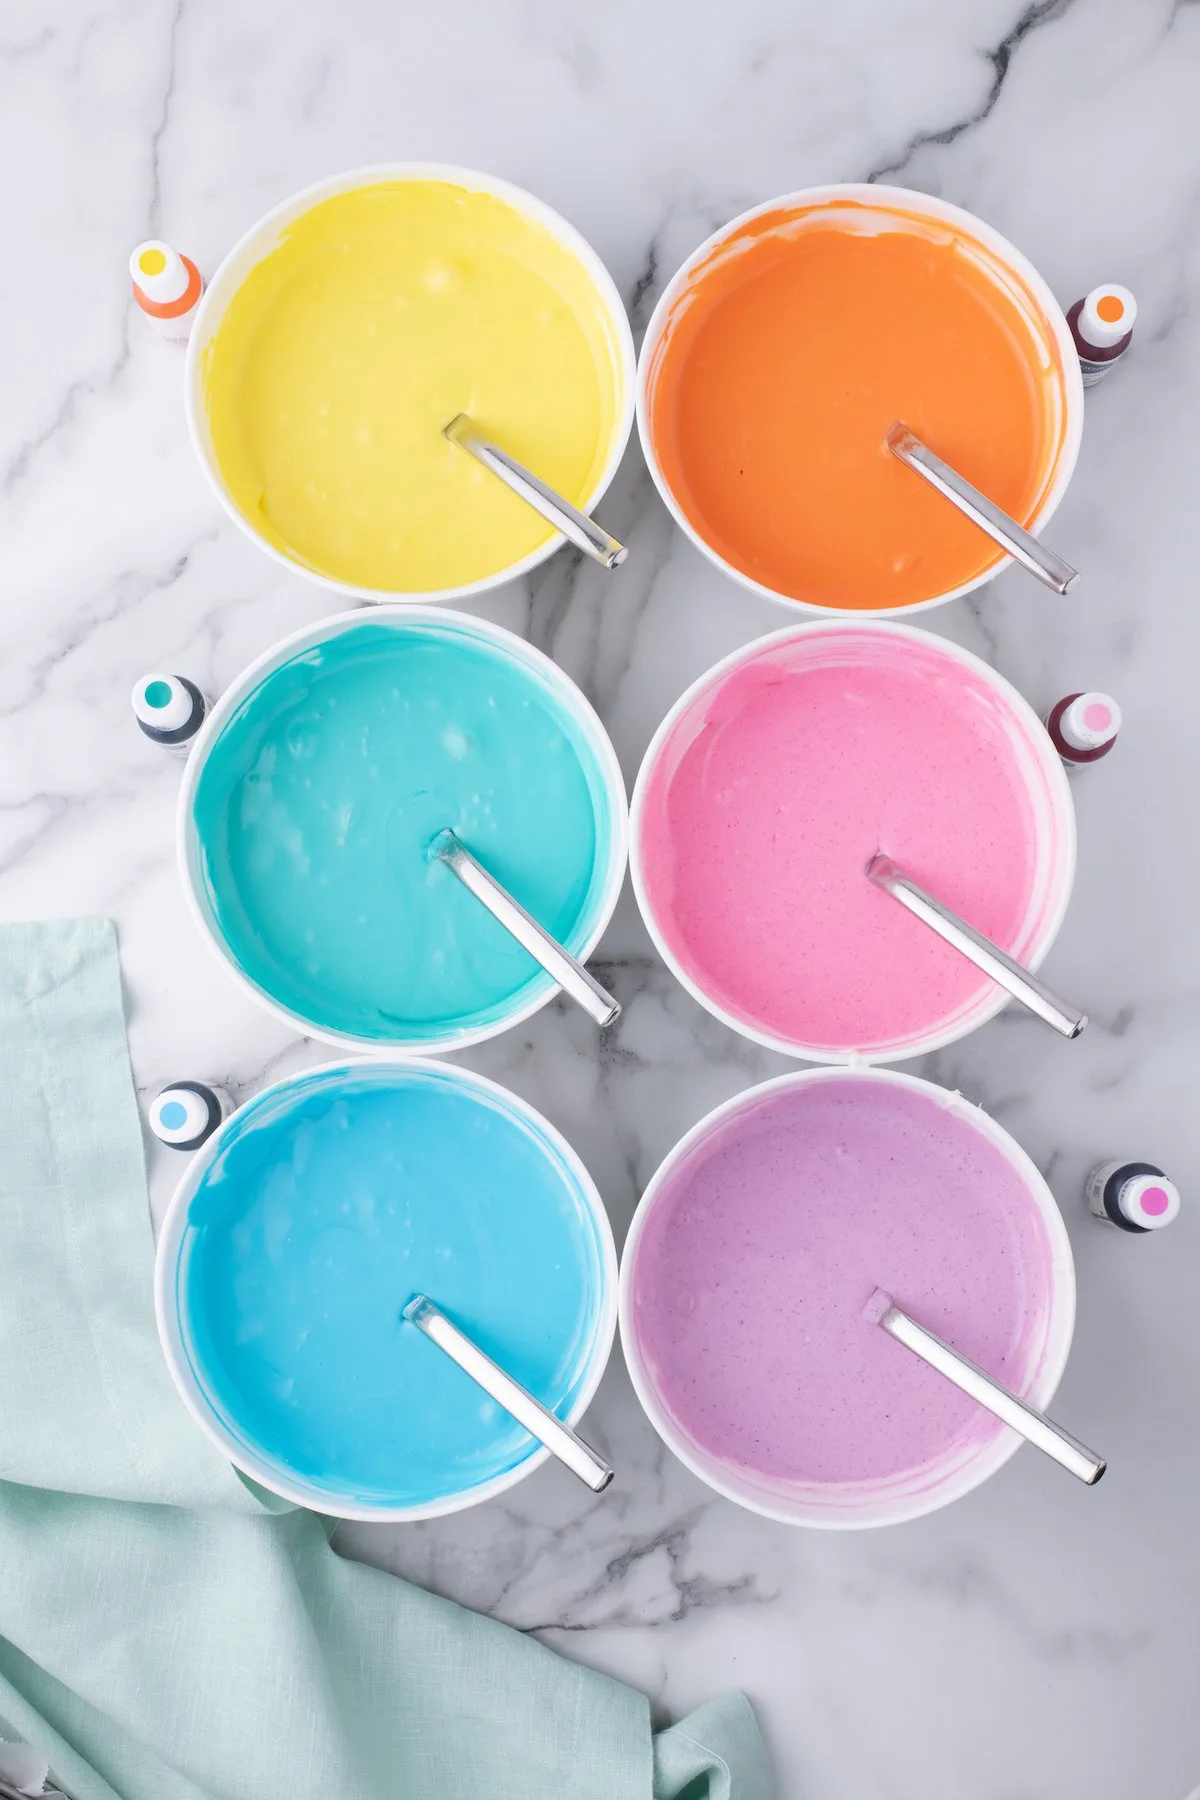 gorgeous bowls of pastel colored cheesecake mixture